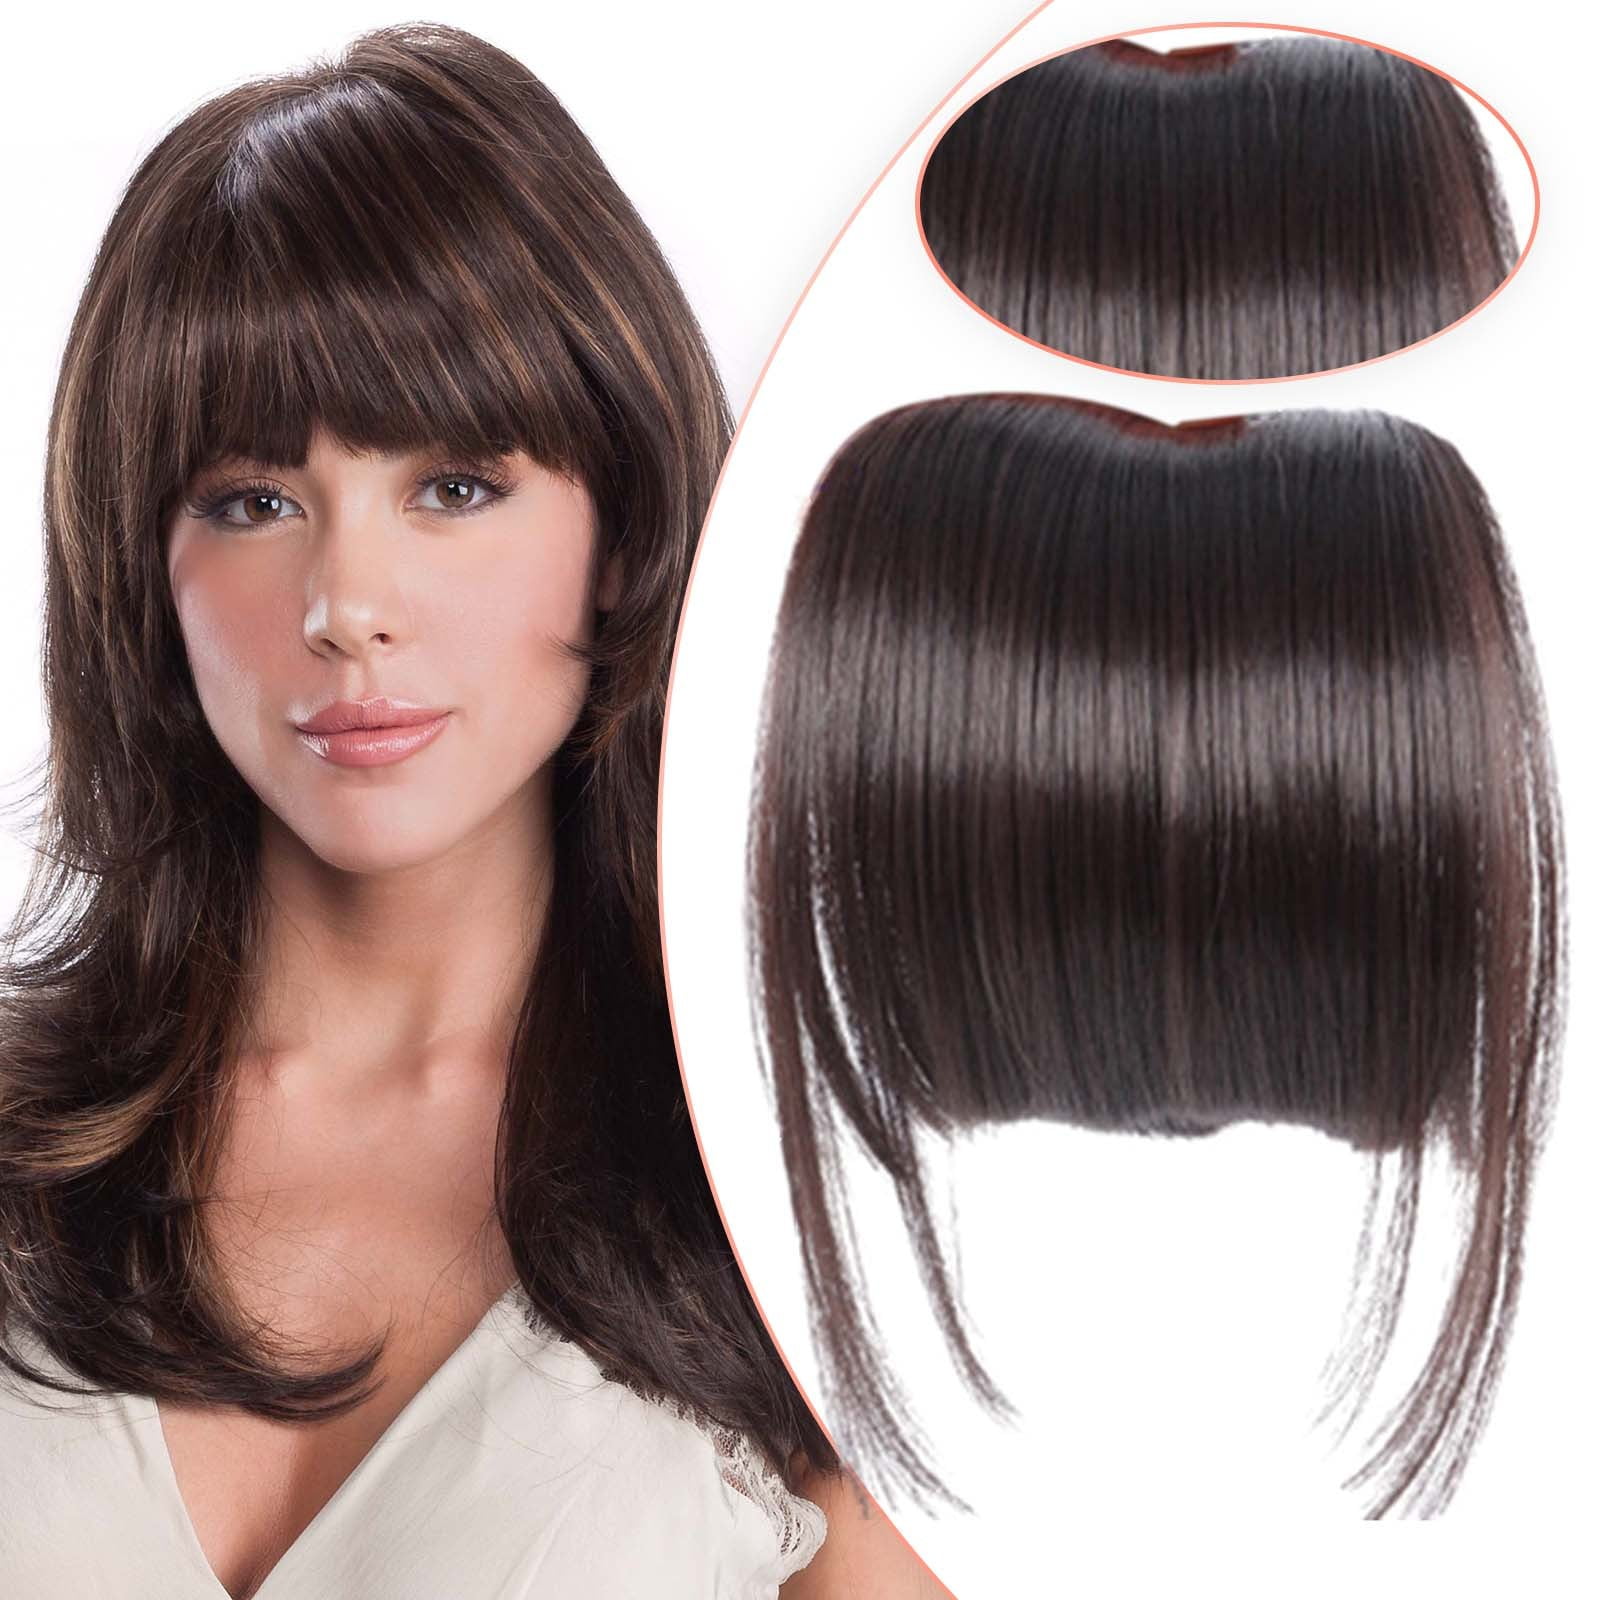 ONHUON Ladies Bangs Wig Front Fringe Head Clipped In The Human Hair  Extension Wig Female Air Bangs Sideburns Qi Bangs Hairpin 